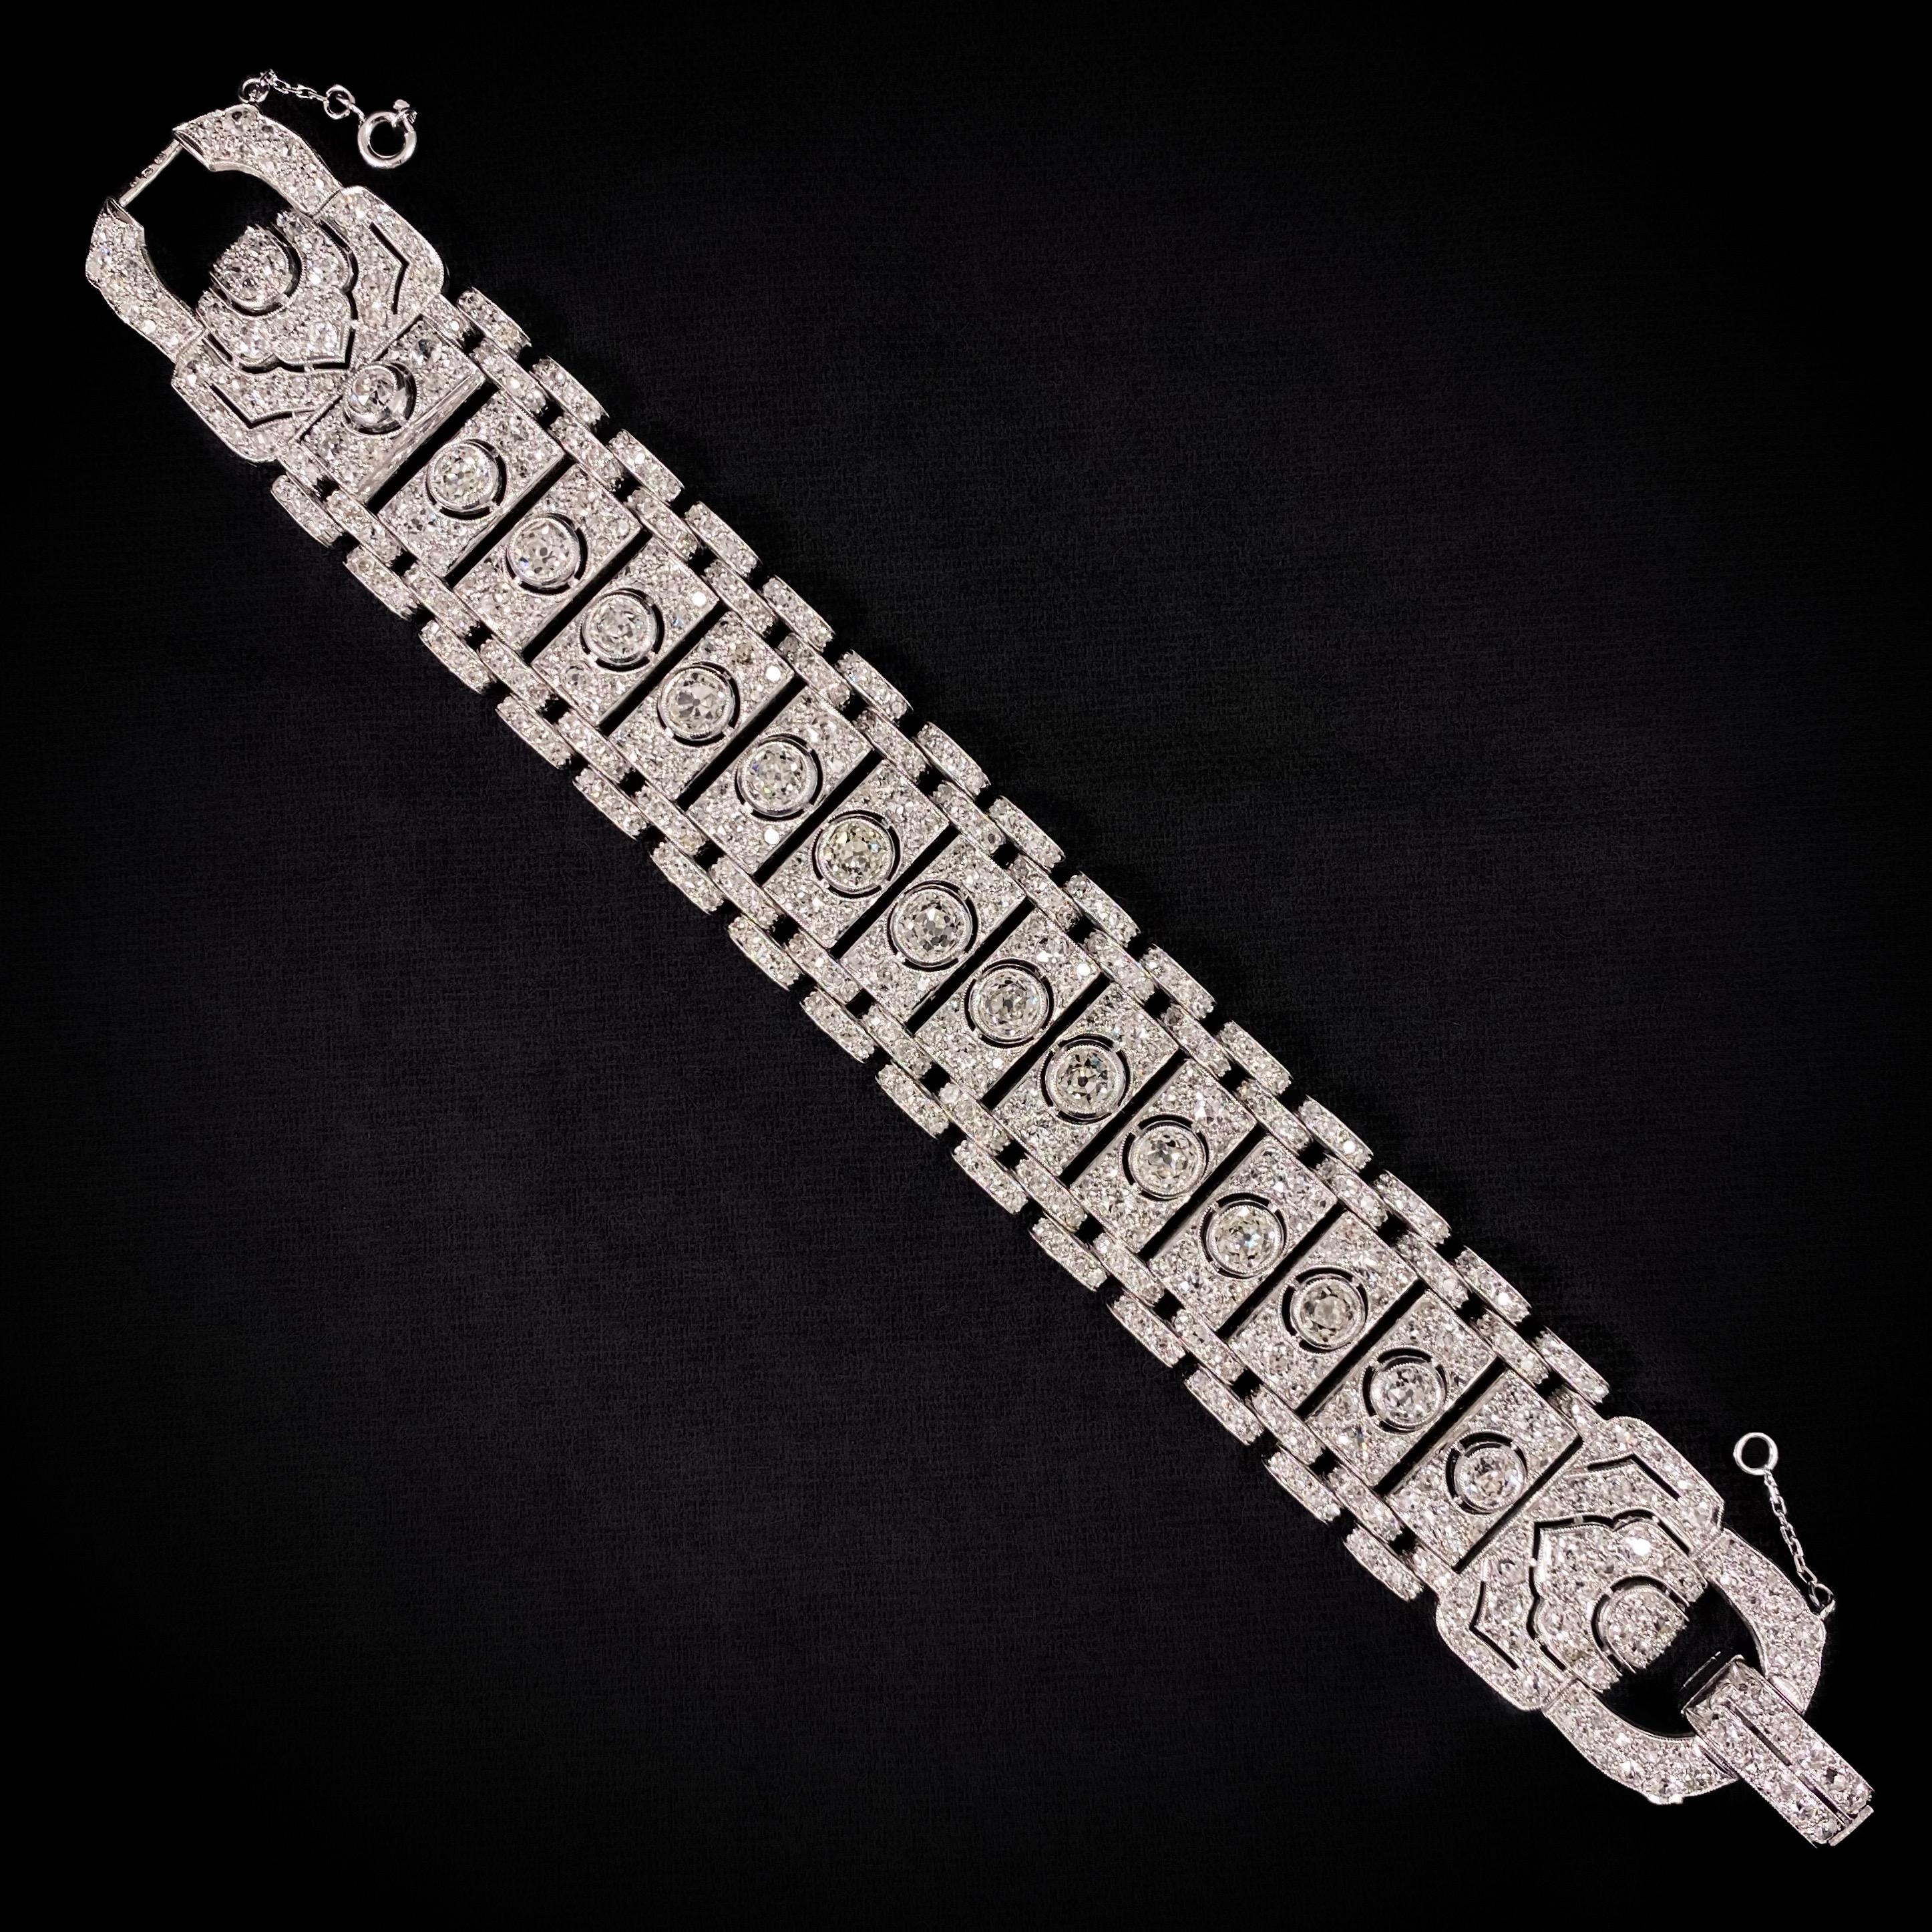 A breathtaking 21-Carat Art Deco diamond geometric buckle tank bracelet in platinum and white gold, French, 1930s. This jewel is composed of a sequence of pave-set diamond plaques accented to the center with a large old brilliant-cut diamond,